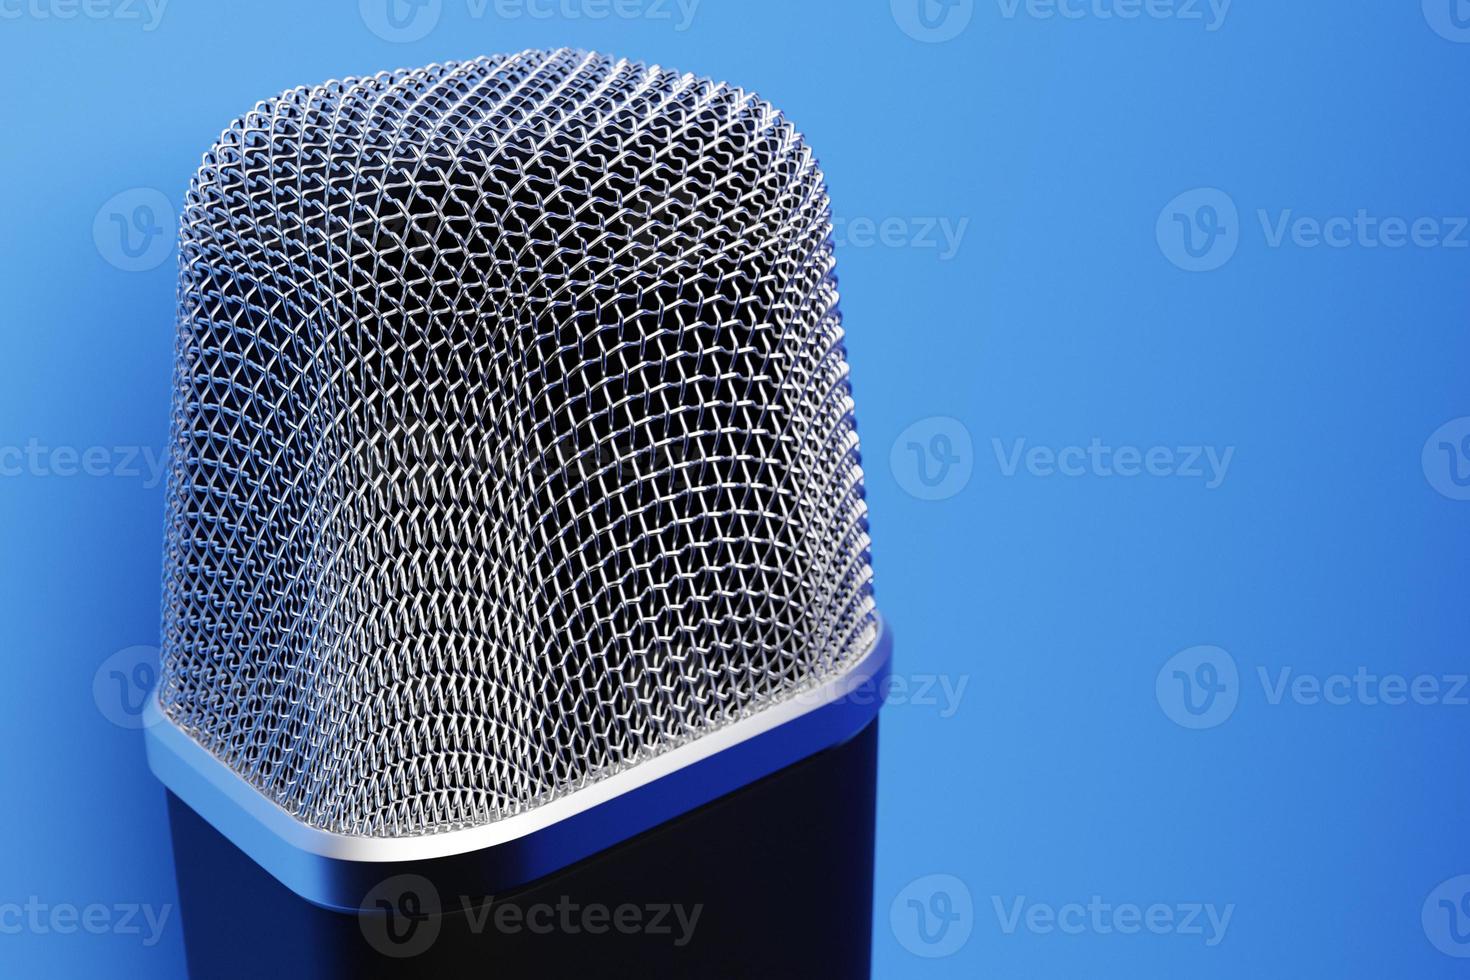 3d illustration close up of a metal microphone on a blue background photo